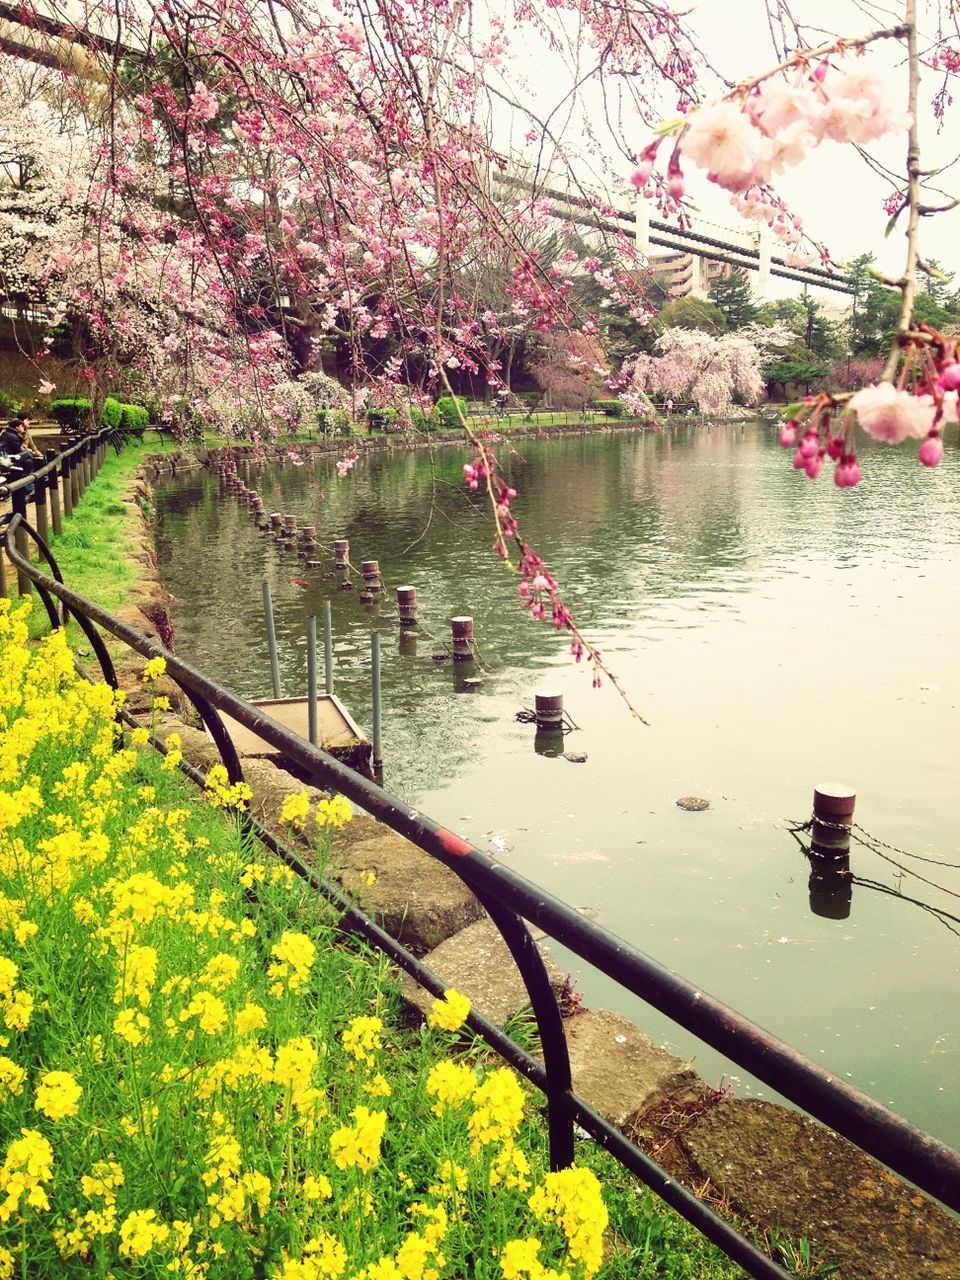 flower, tree, water, growth, freshness, beauty in nature, nature, railing, pink color, river, built structure, bridge - man made structure, fragility, branch, plant, blossom, architecture, lake, transportation, in bloom